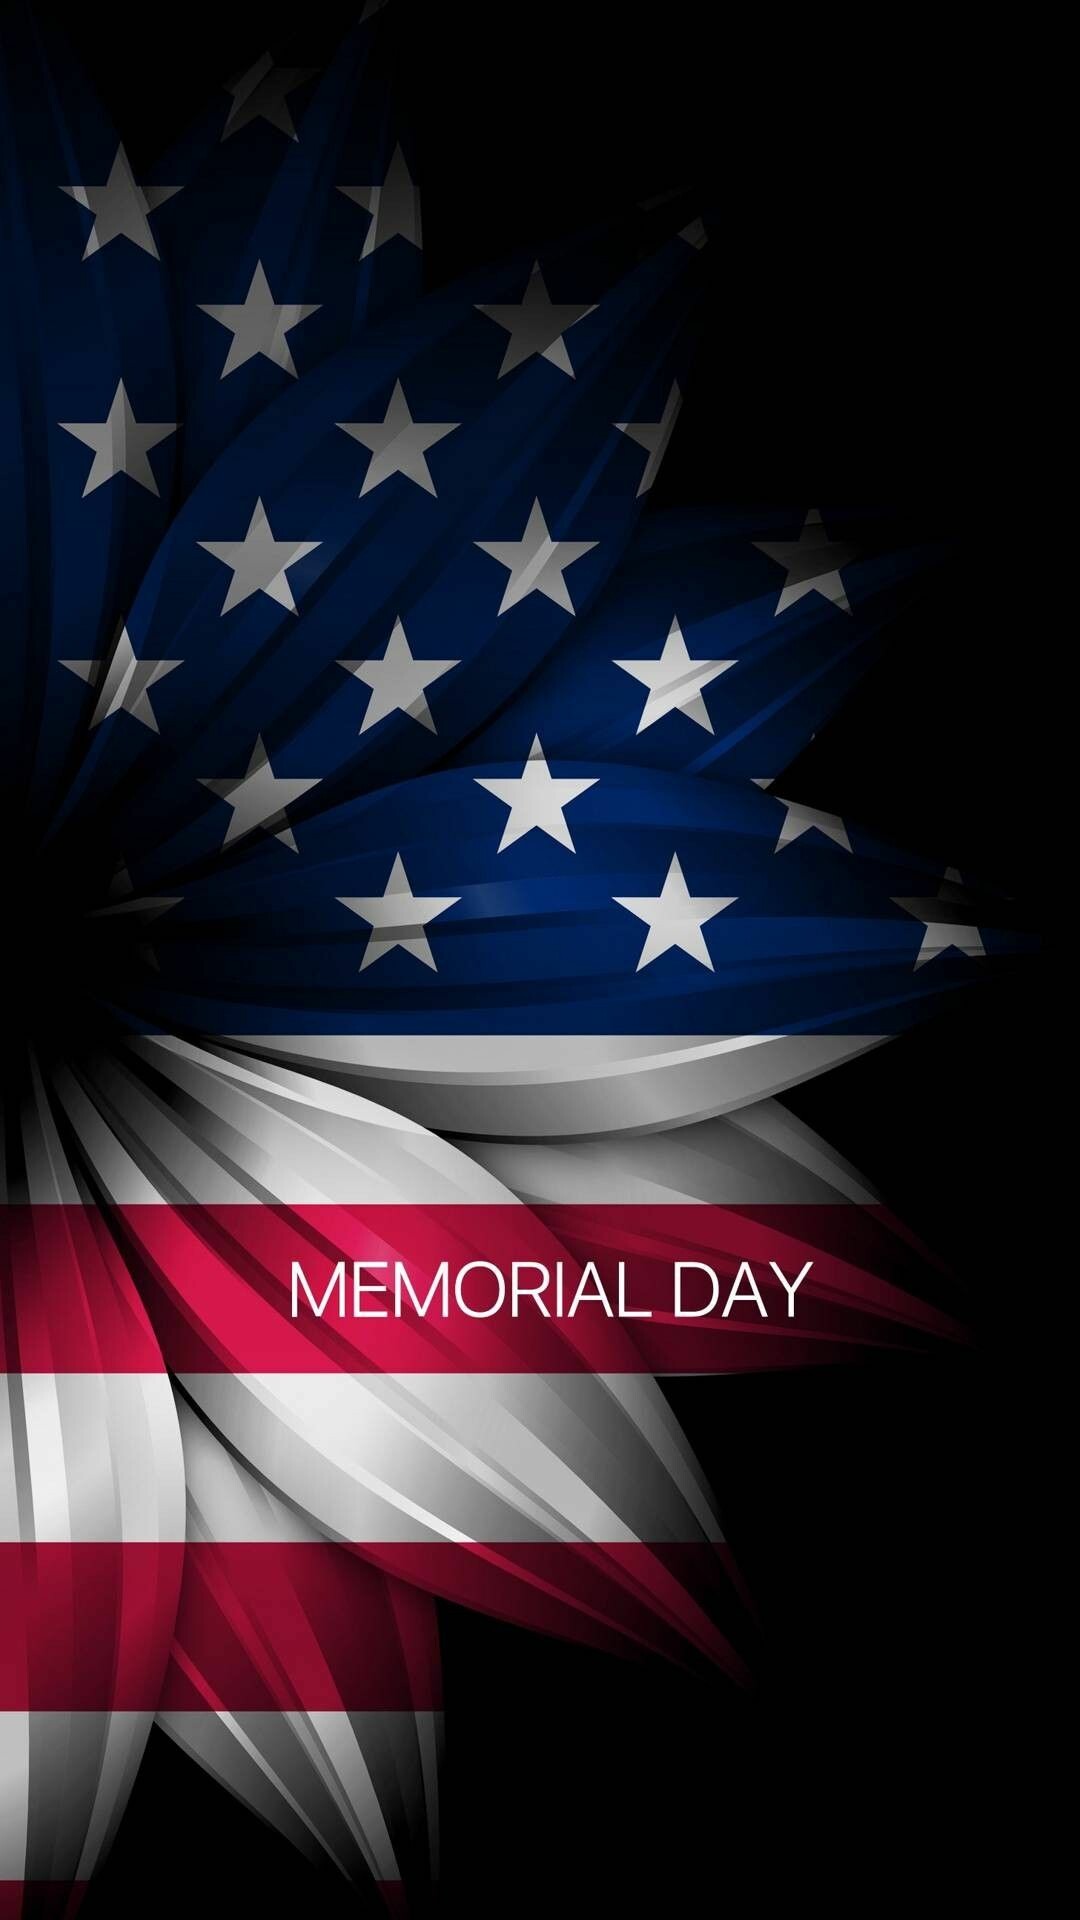 Memorial Day: Patriotic, Holiday, Flag of the United States. 1080x1920 Full HD Background.